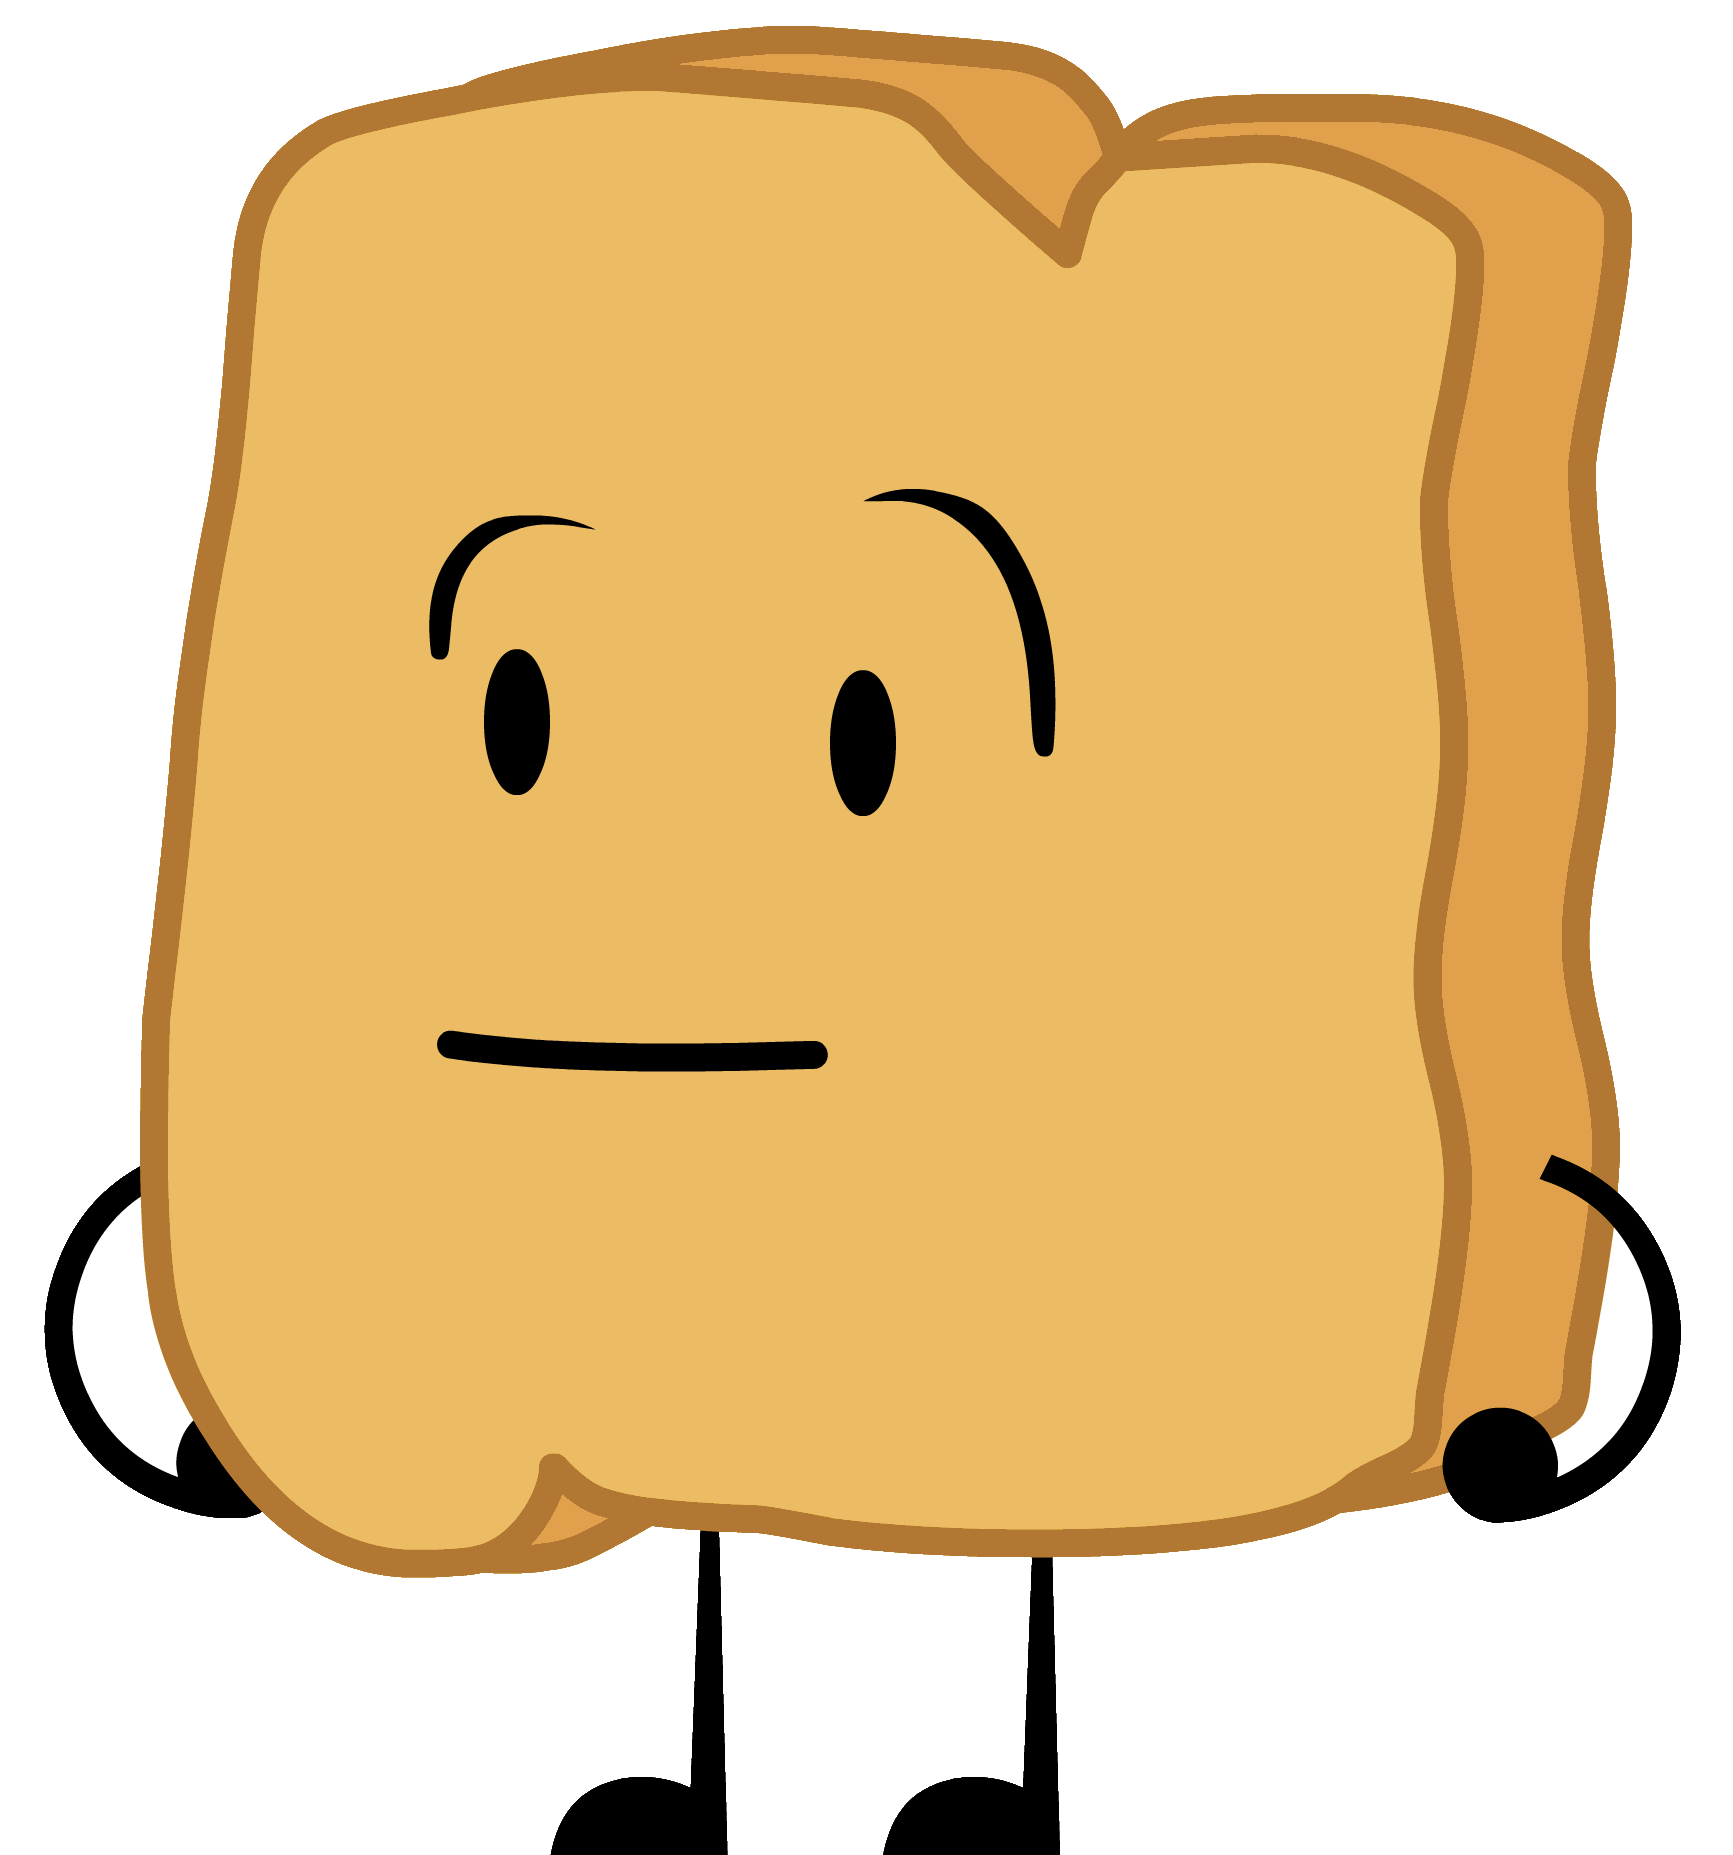 Image woody for bfdi. Match clipart reprehensible